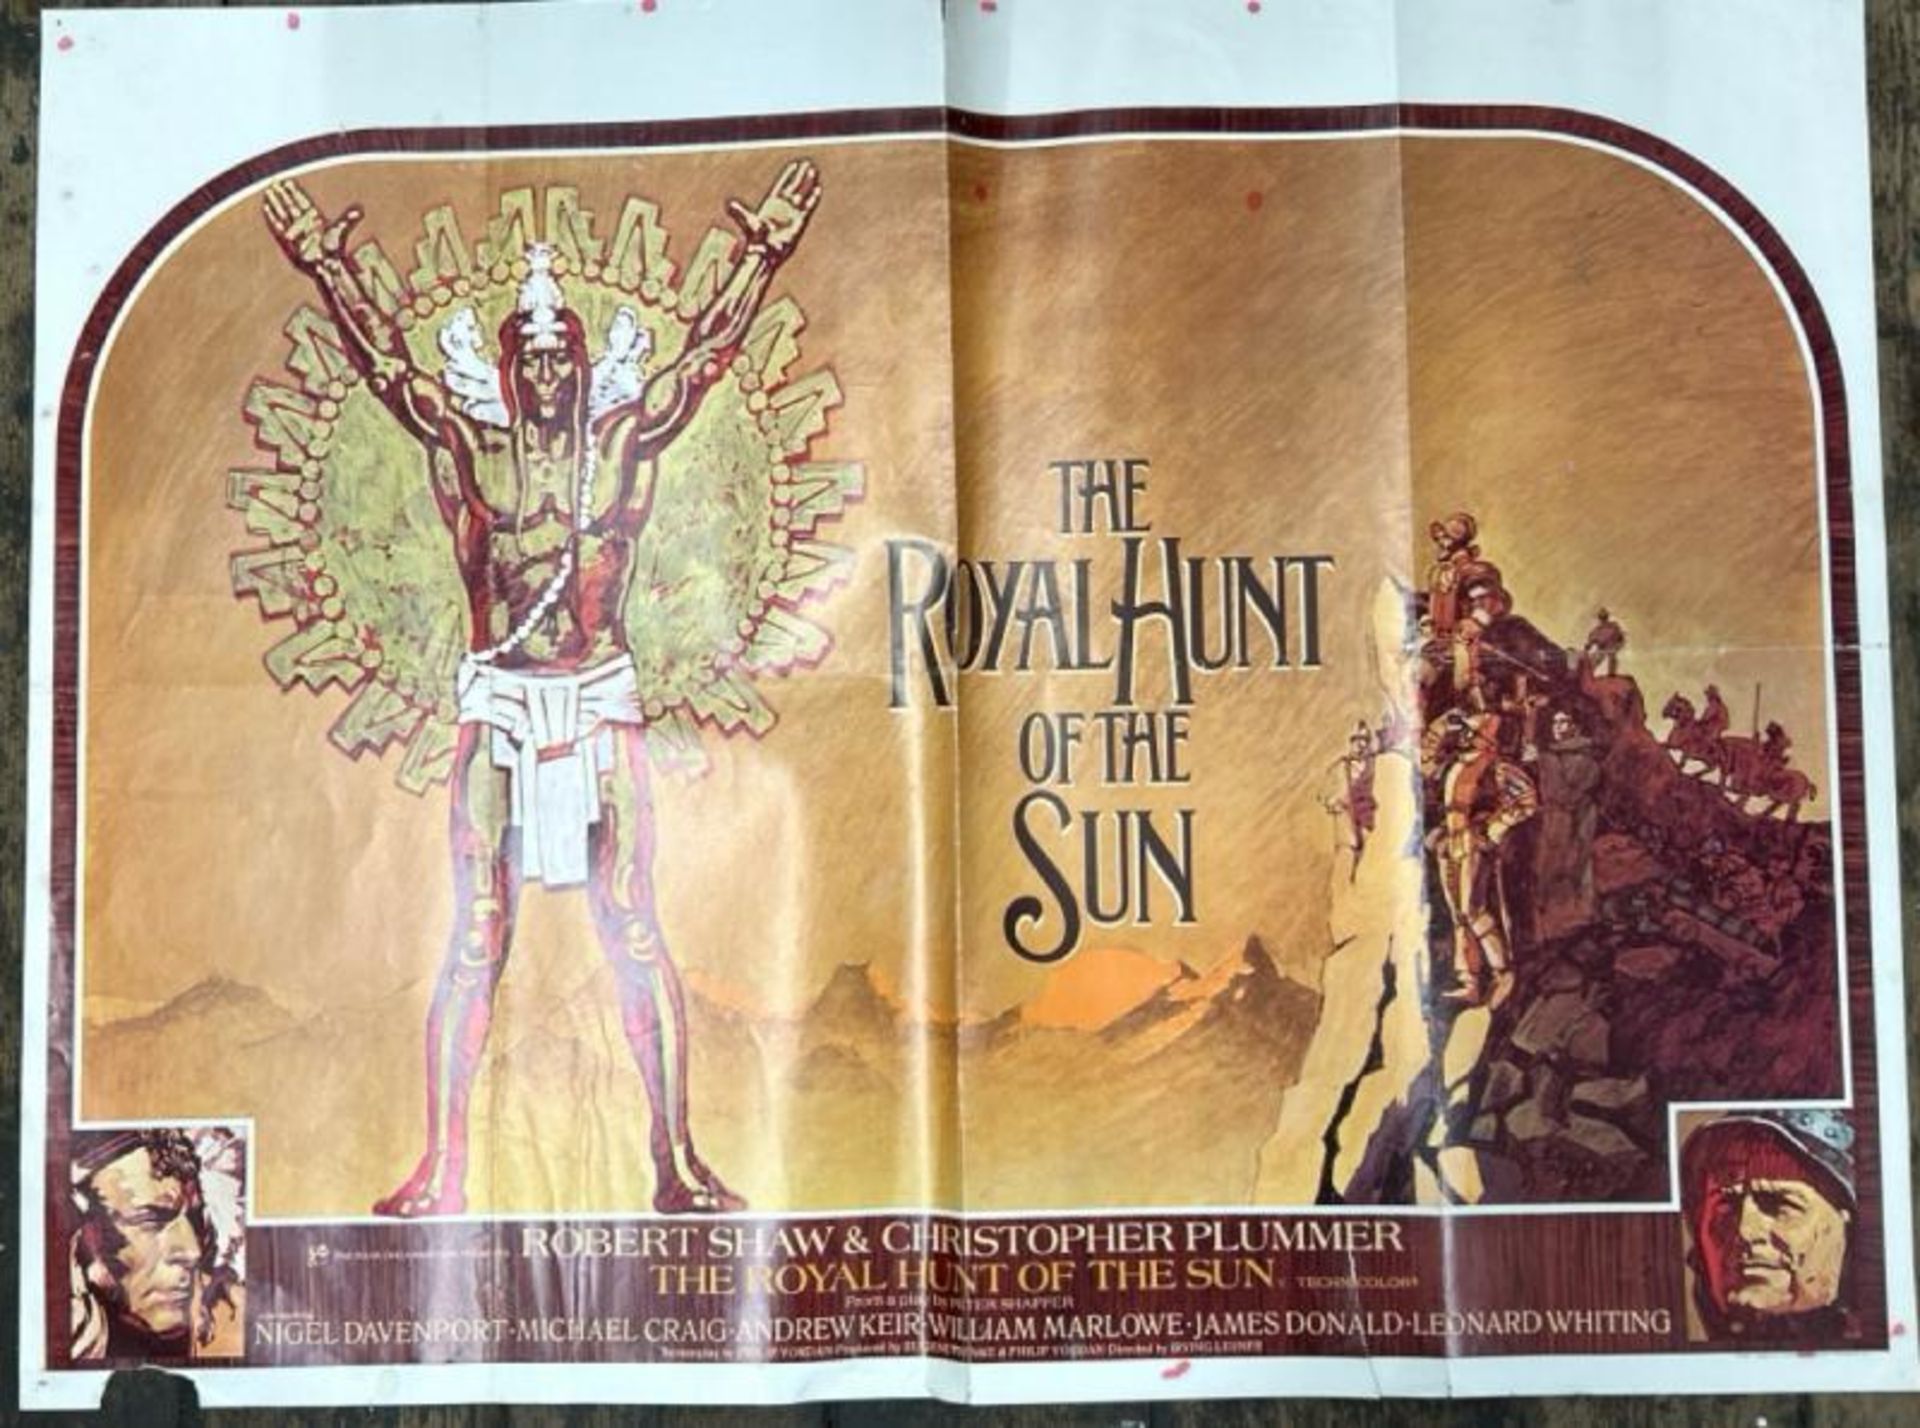 THE ROYAL HUNT OF THE SUN, ORIGINAL FILM POSTER, PRINTED IN ENGLAND BY LONSDALE AND BATHOLOMEW